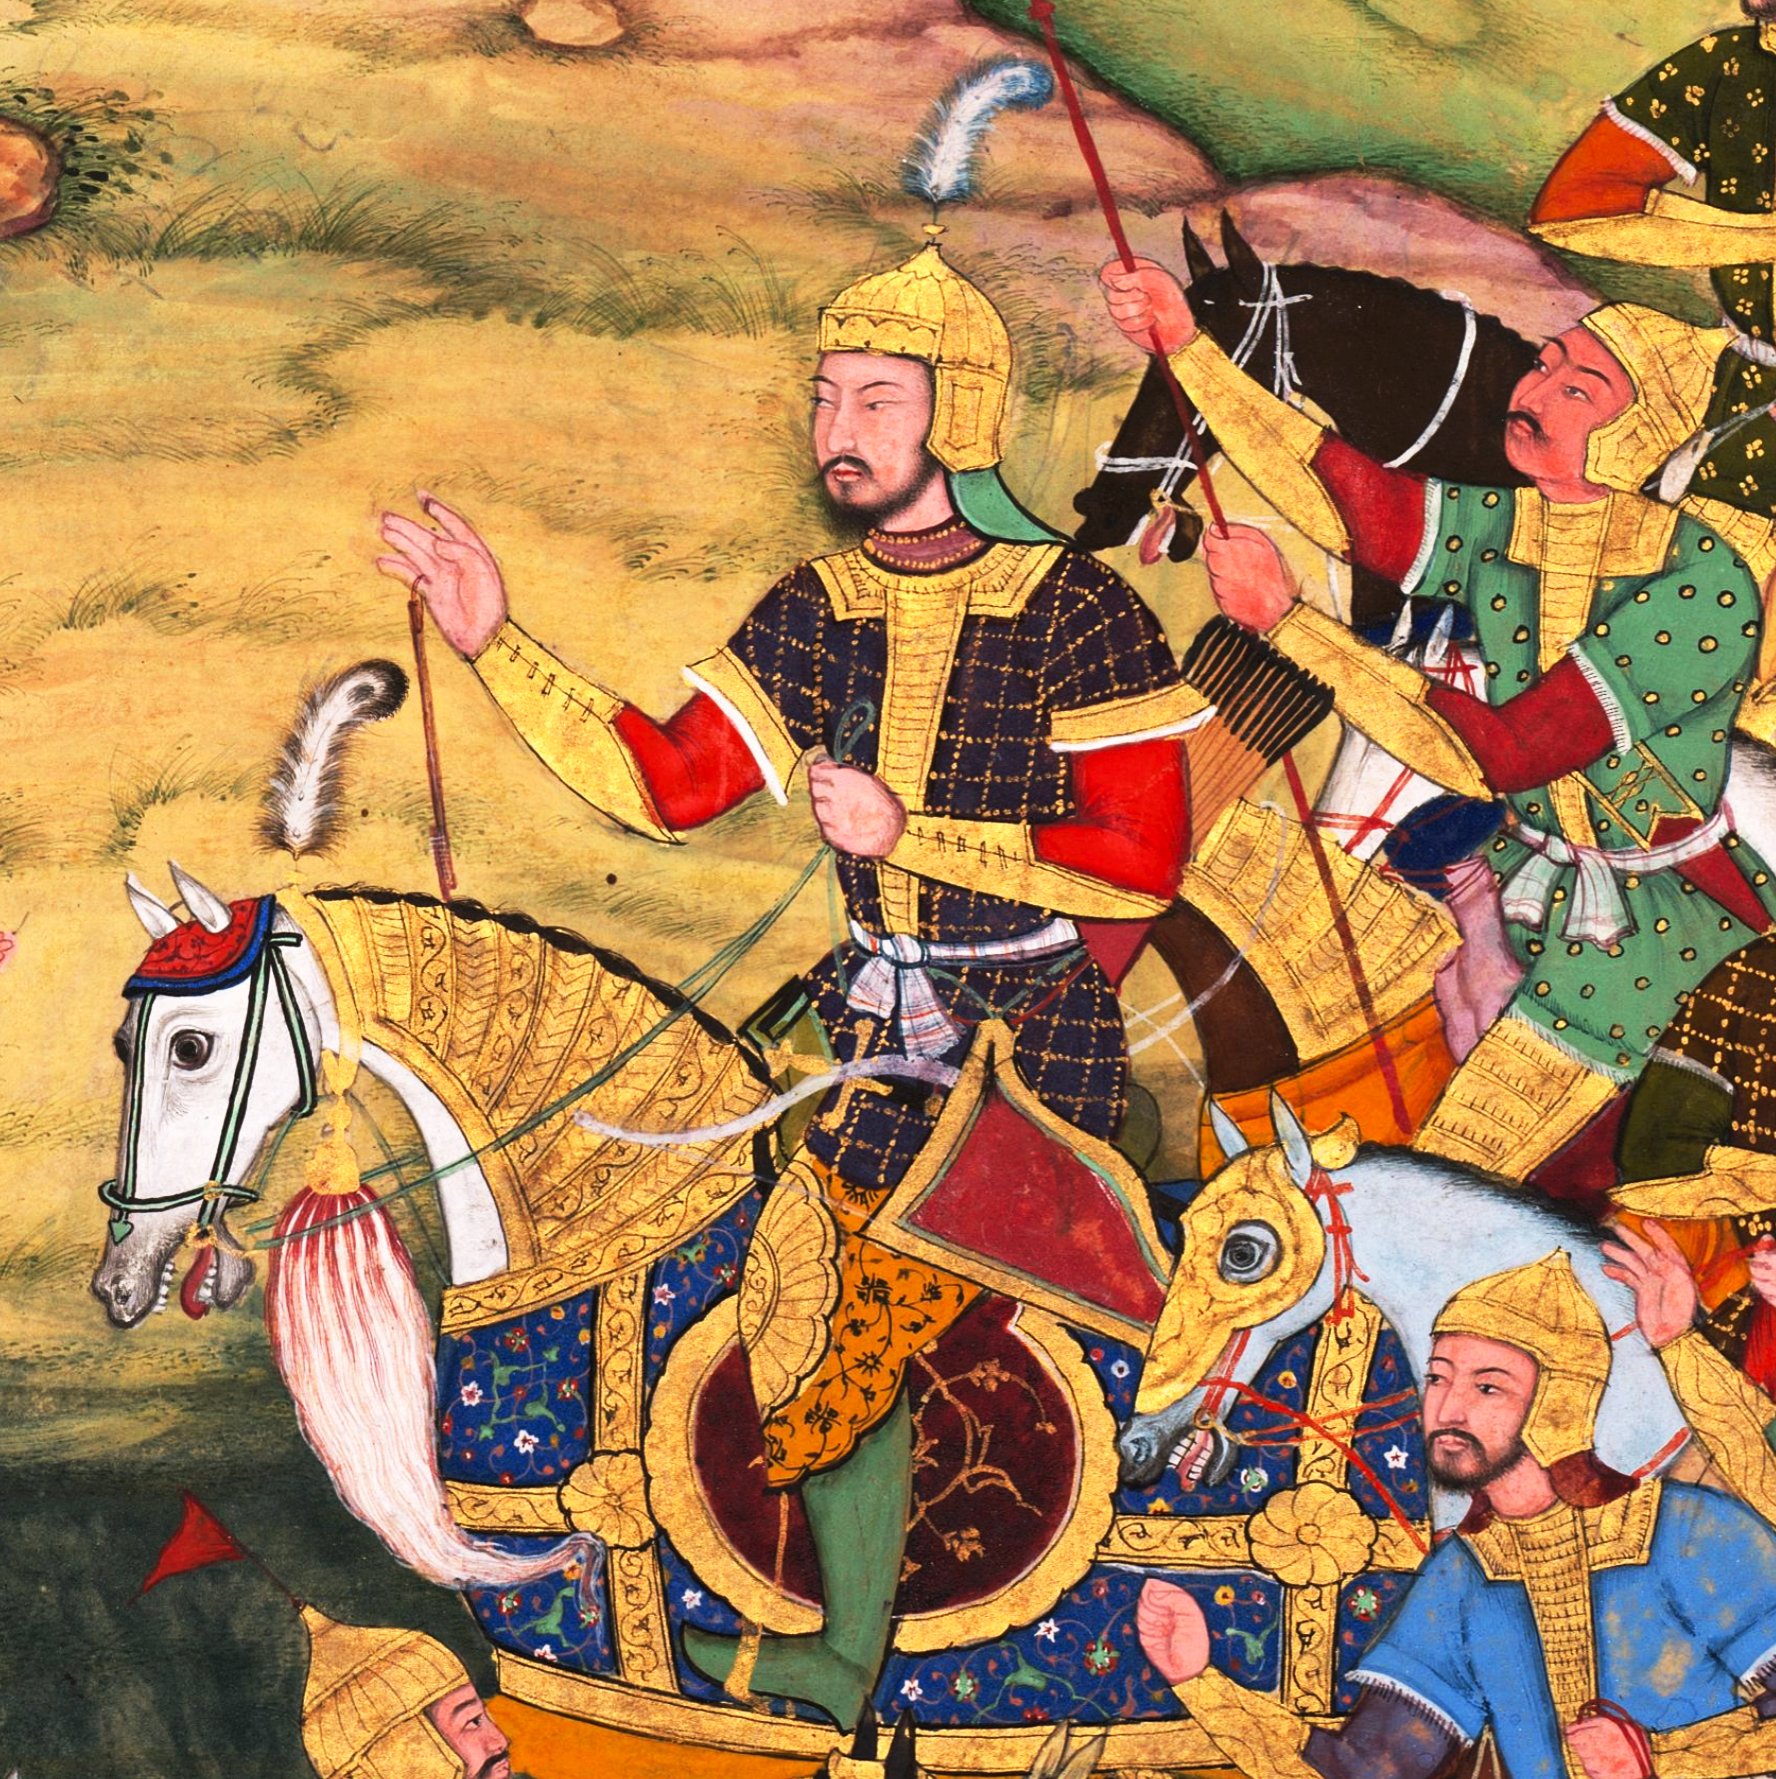 A painting of Hulagu Khan with his Mongolian troops on horseback.